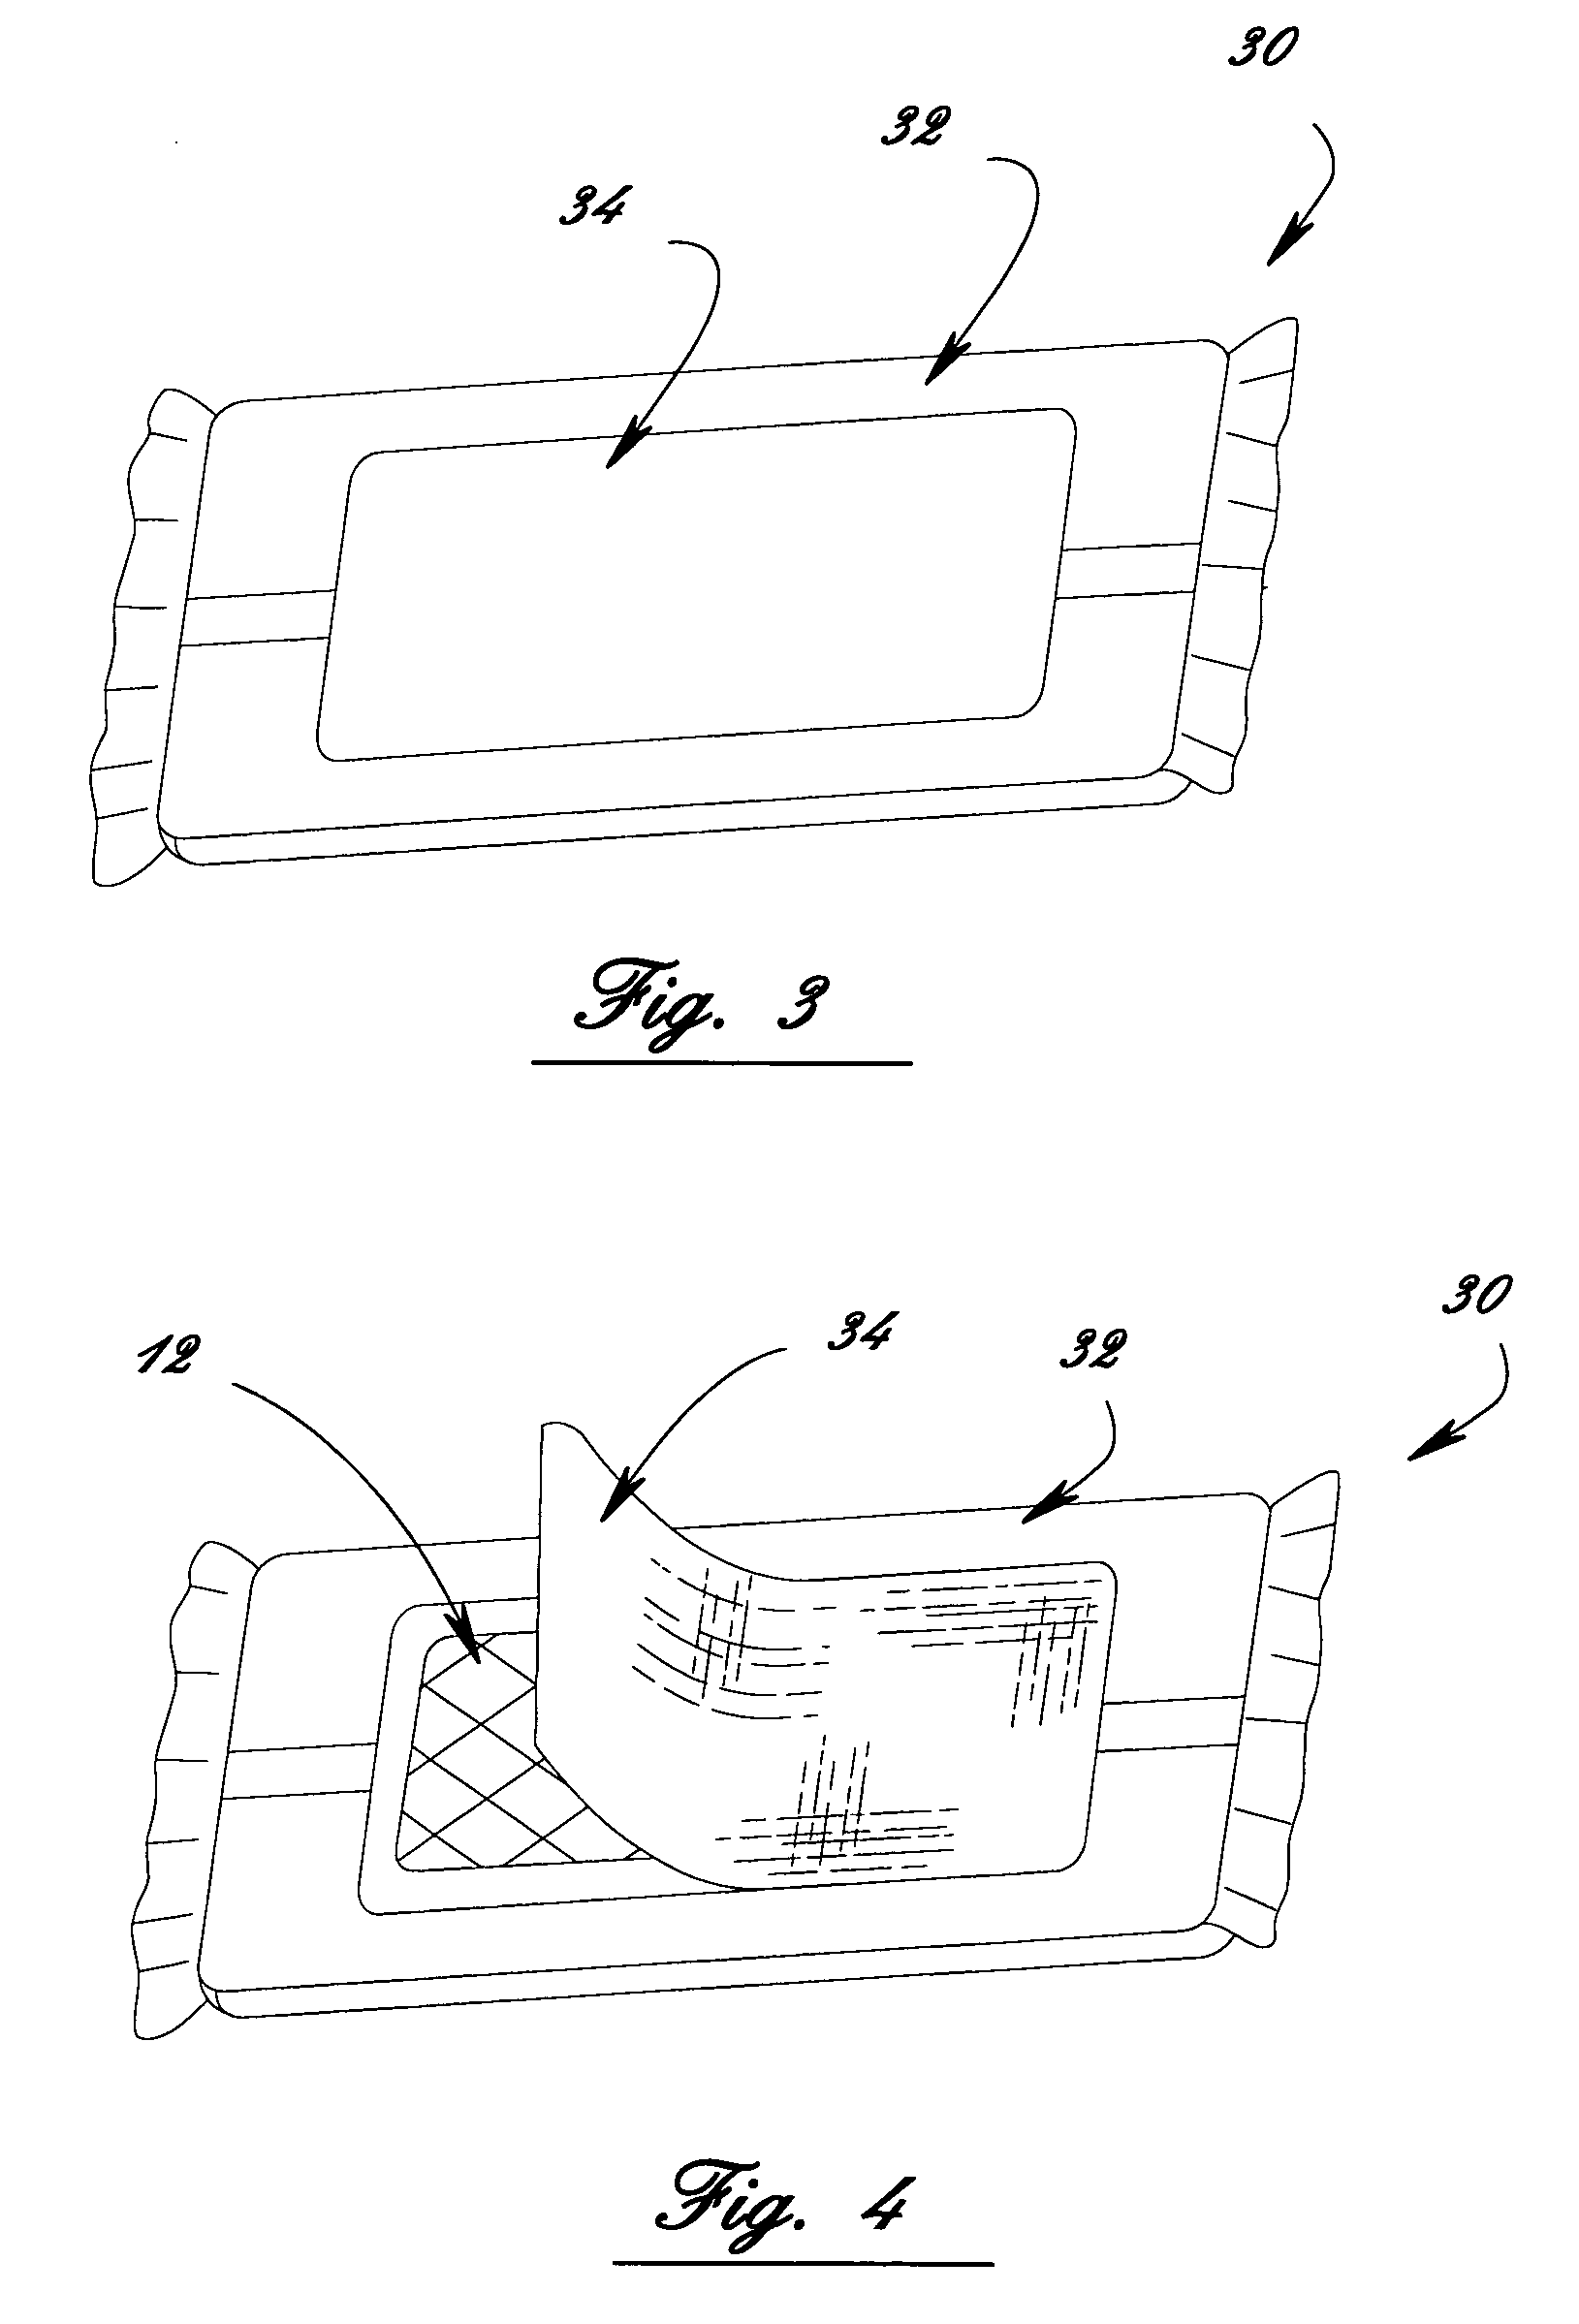 Sheet substrates impregnated with aromatic releasing compositions and a method of delivery of aromatic releasing compositions